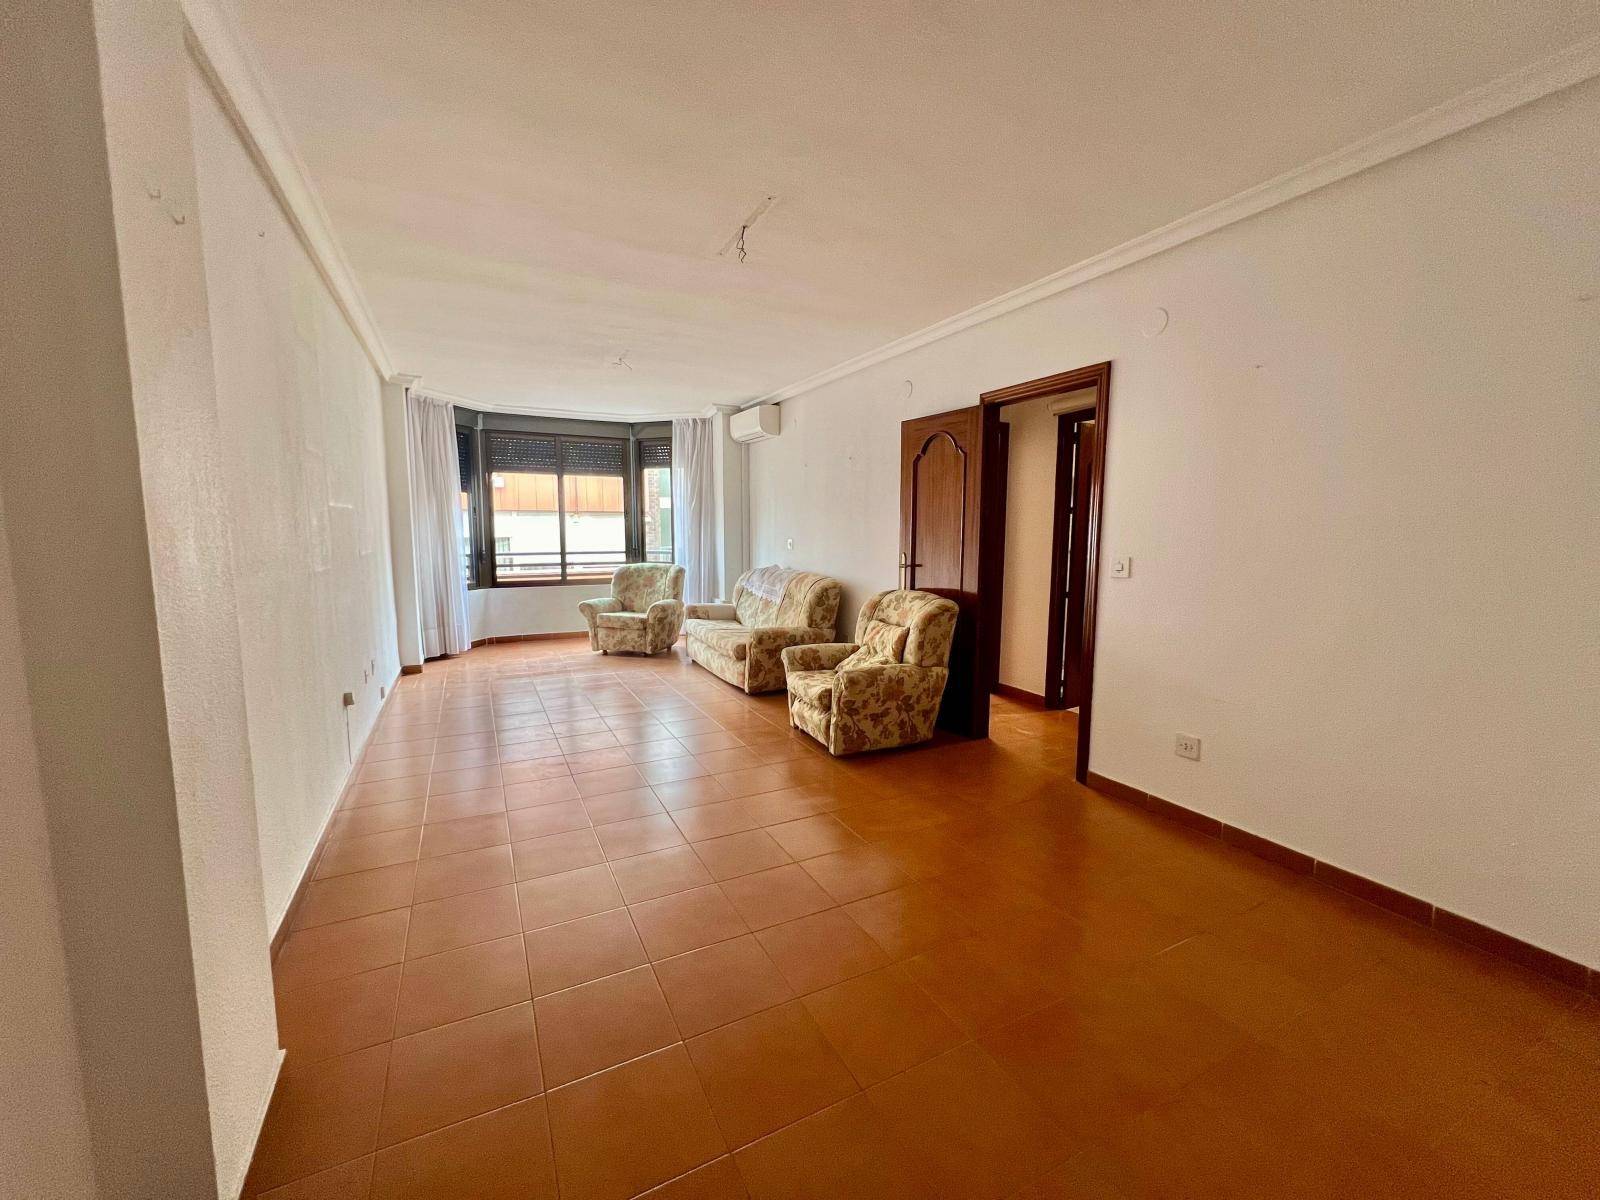 SPACIOUS APARTMENT IN THE HEART OF THE CITY CENTRE, 300 METRES FROM THE YACHT CLUB